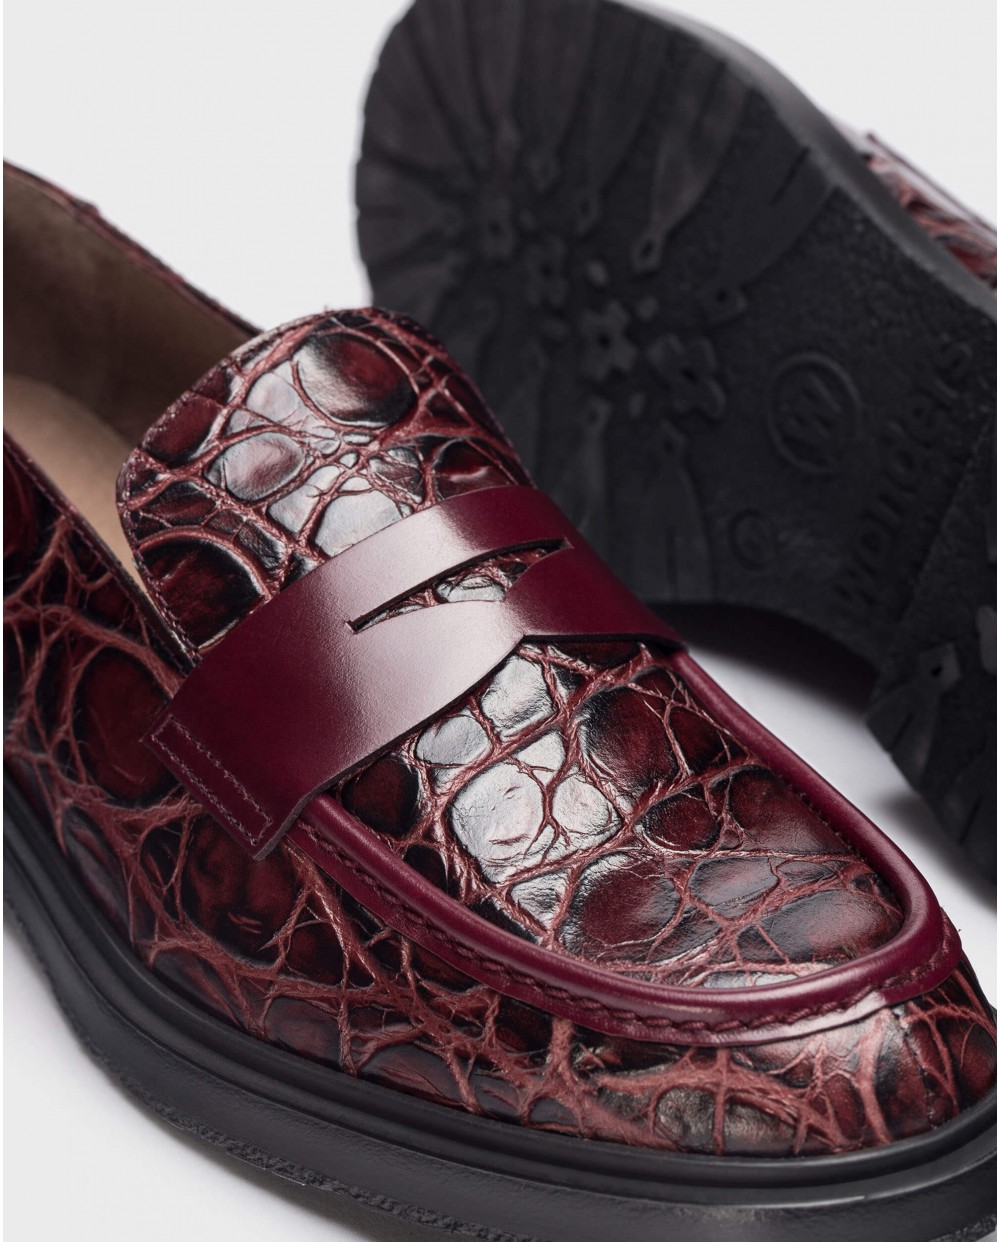 Wonders-Flat Shoes-Burgundy NED moccasin